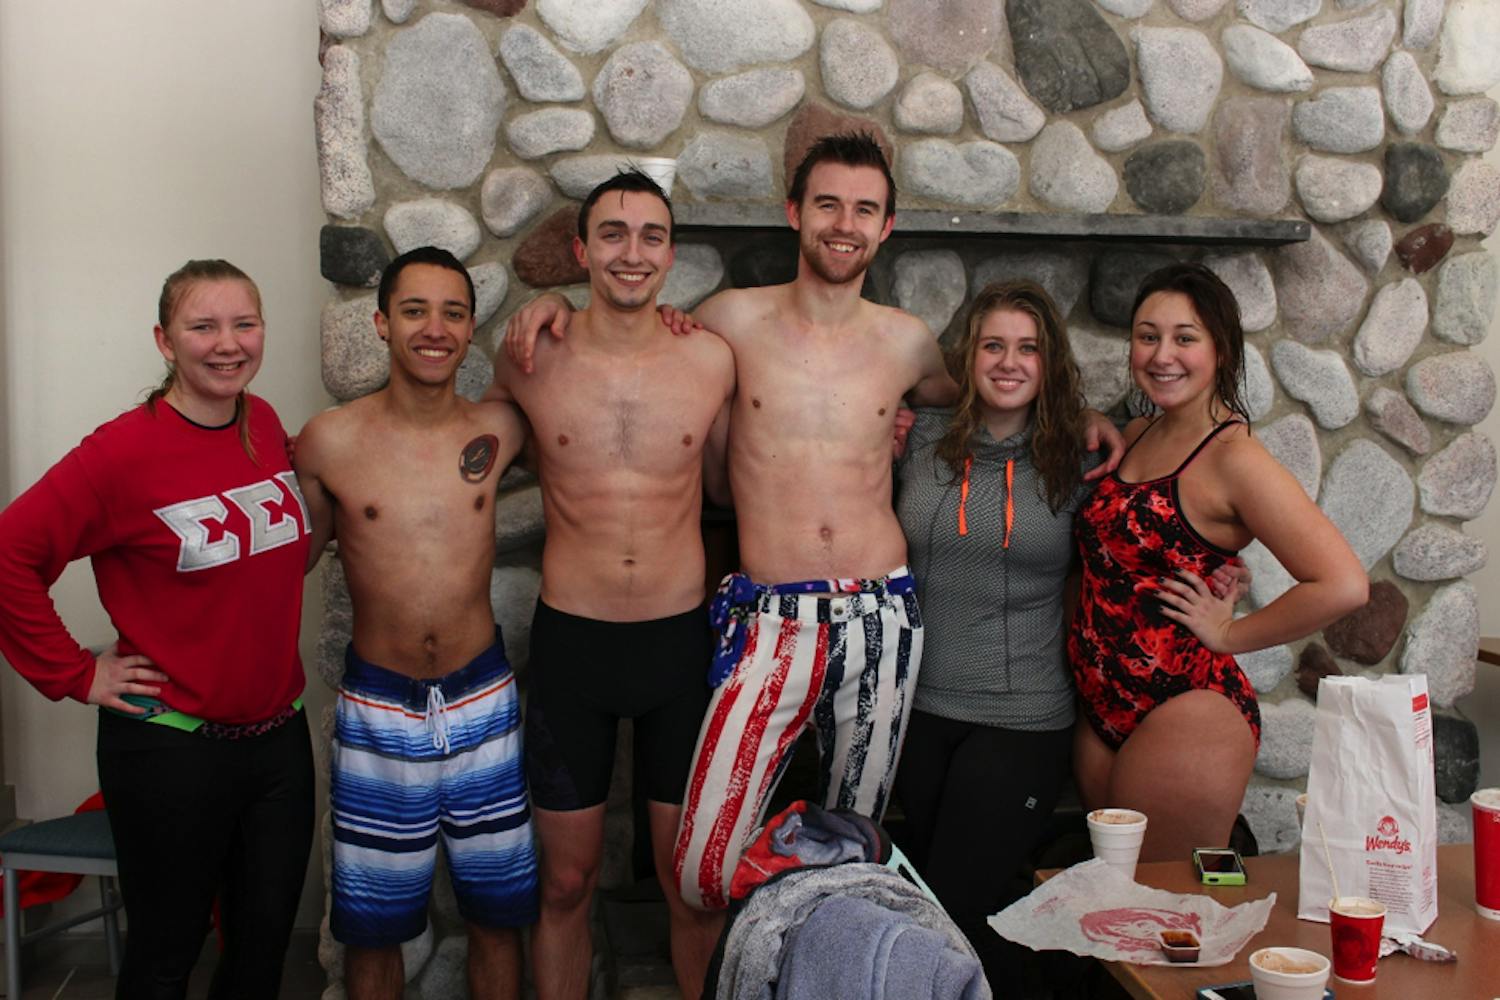 Post-jump of the first group: (left to right)&nbsp;Jackie&nbsp;(Tri Sigma), Ian Easter&nbsp;(DSP),&nbsp;Johnathan (DSP), Chris&nbsp;(DSP), Mackenzie (AGD sorority) & Sydney&nbsp;(AGD).